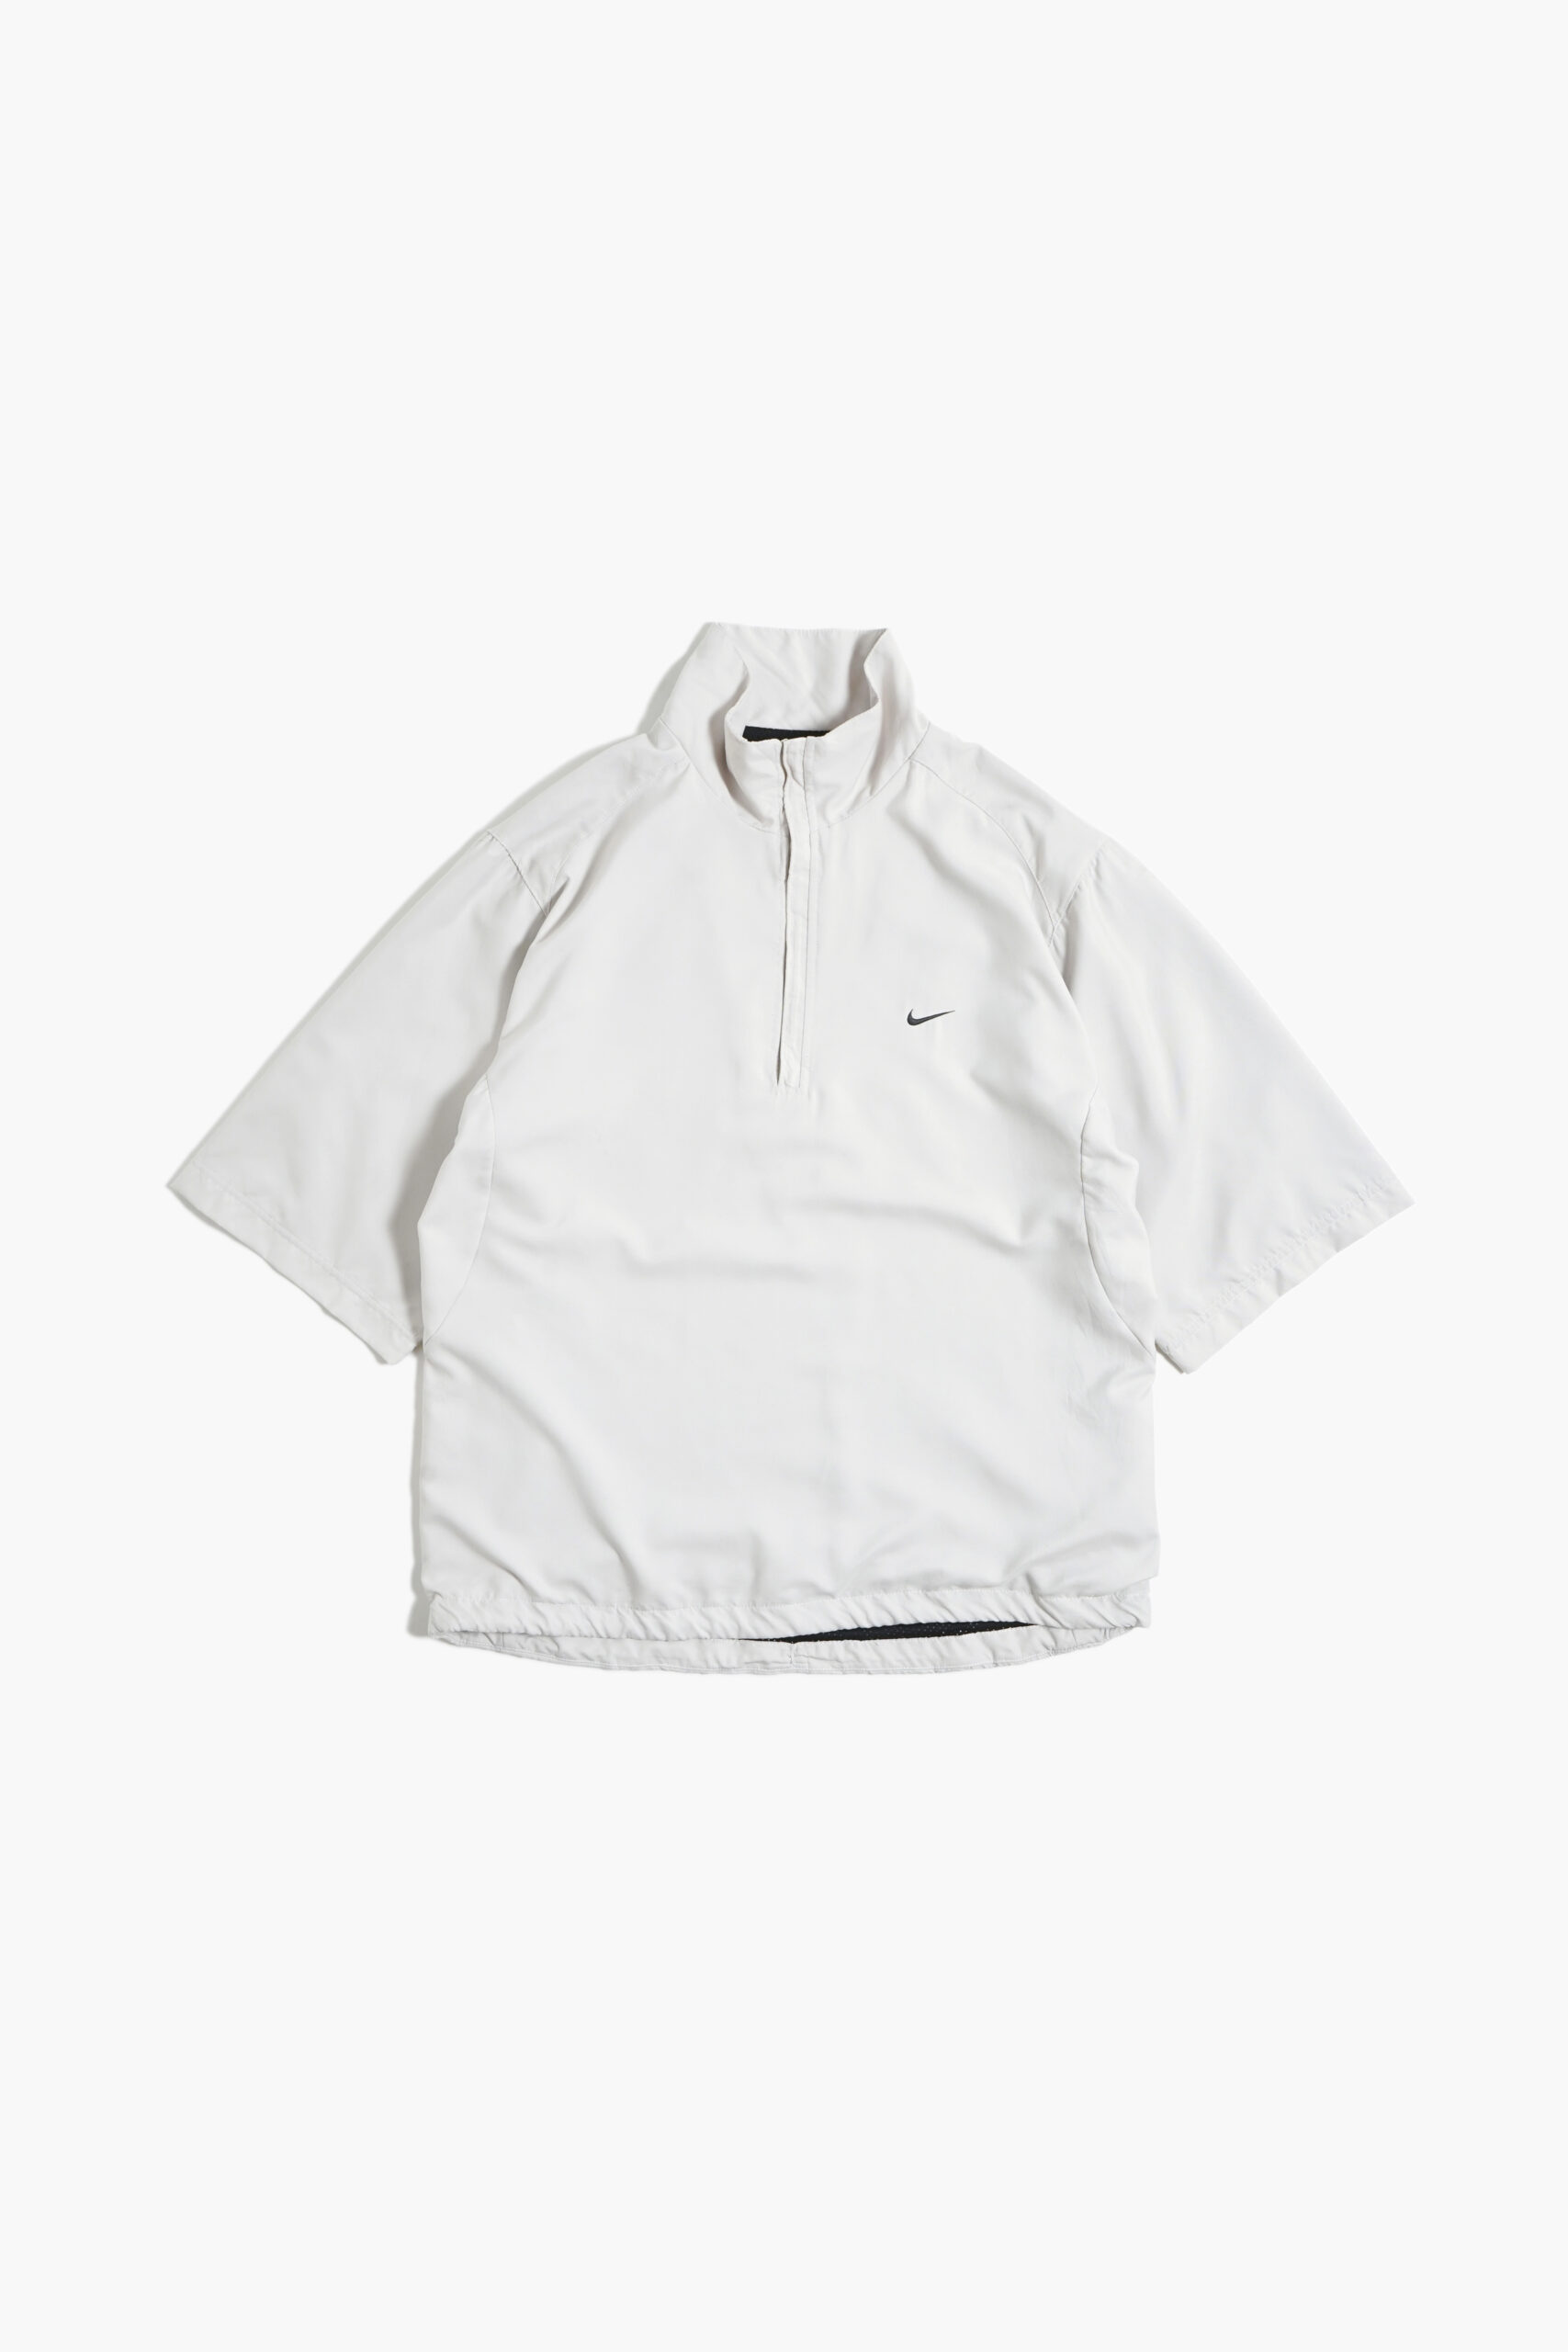 NIKE GOLF S/S PULLOVER OFF WHITE